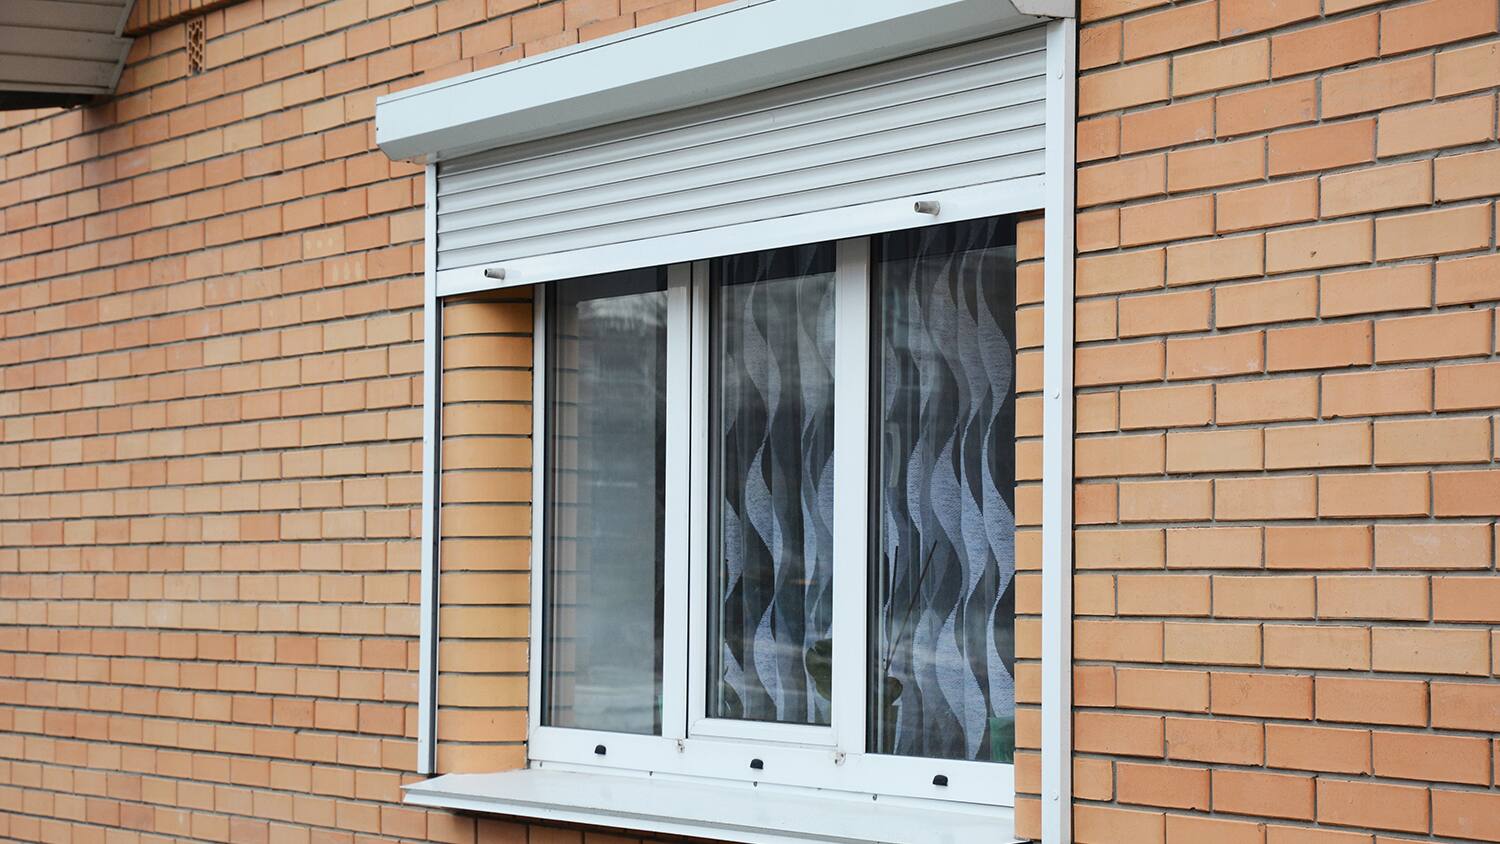 How To Install Window Shutters On Brick